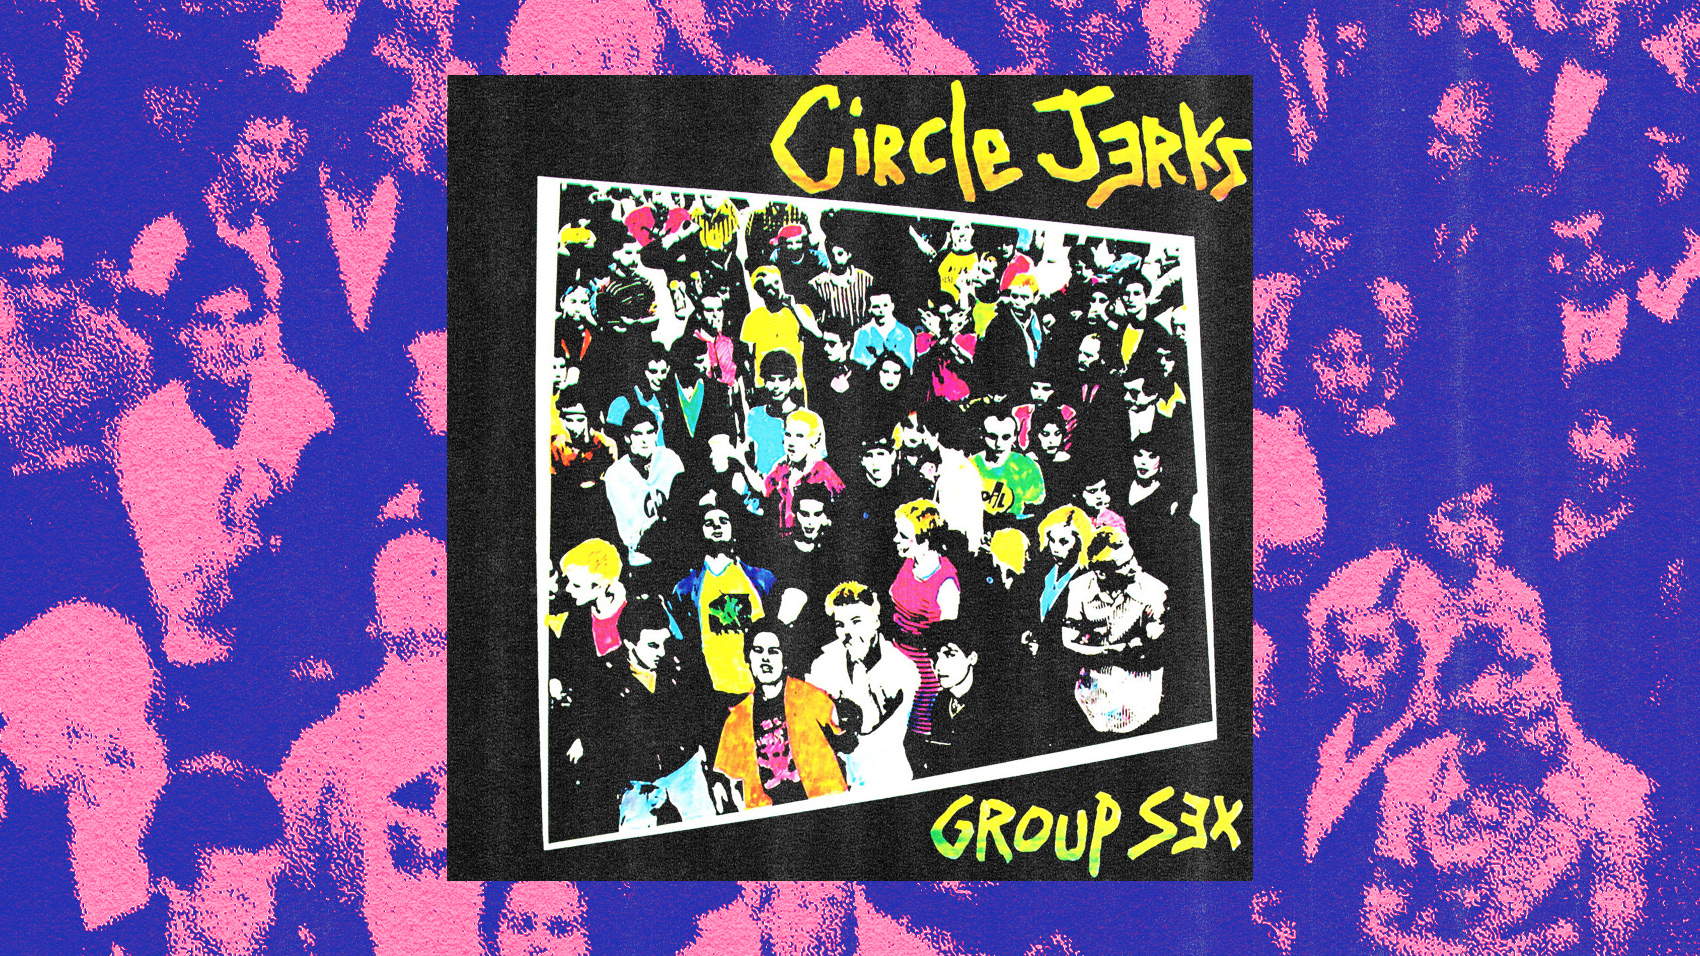 Group Sex Turns 40 An Oral History of Circle Jerks Debut